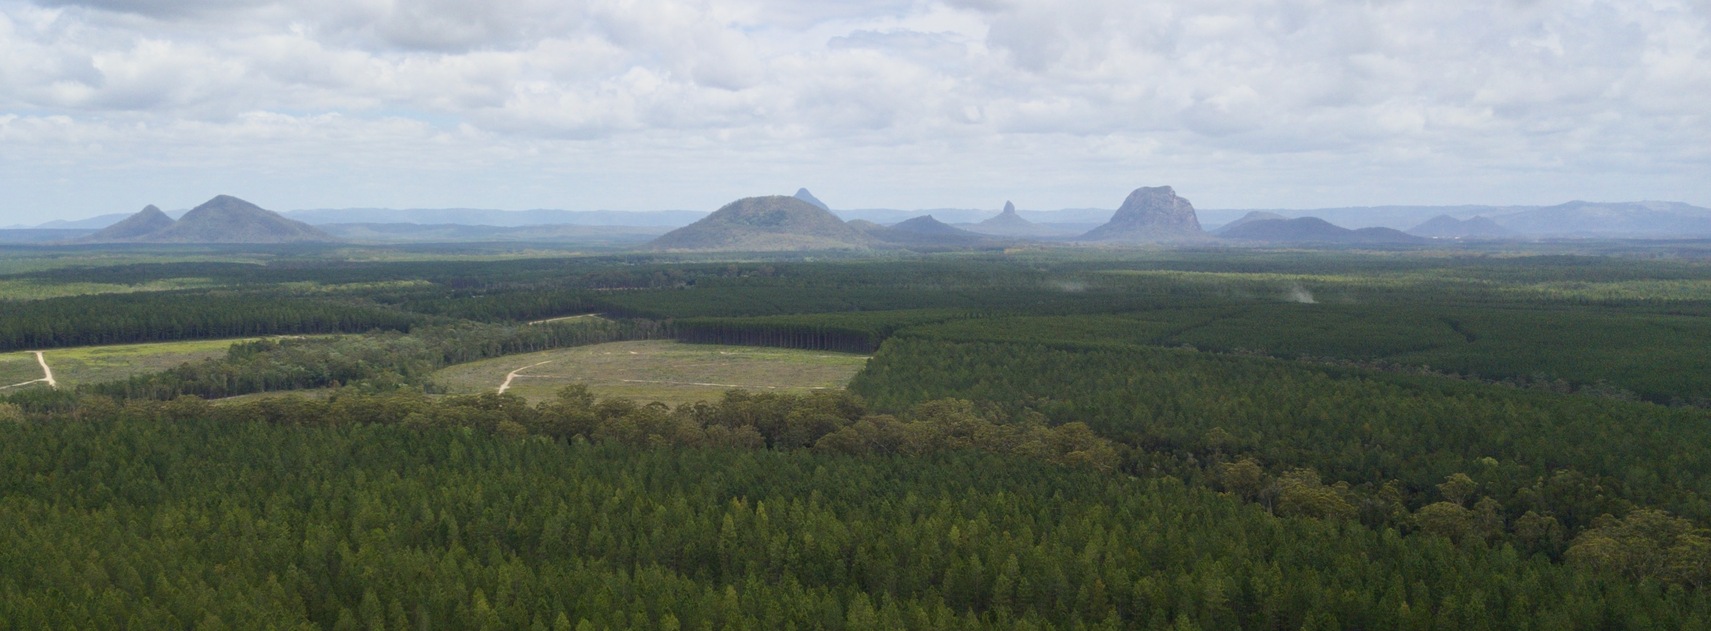 Looking Northwest towards the Glasshouse Mountains, from 120m above the point